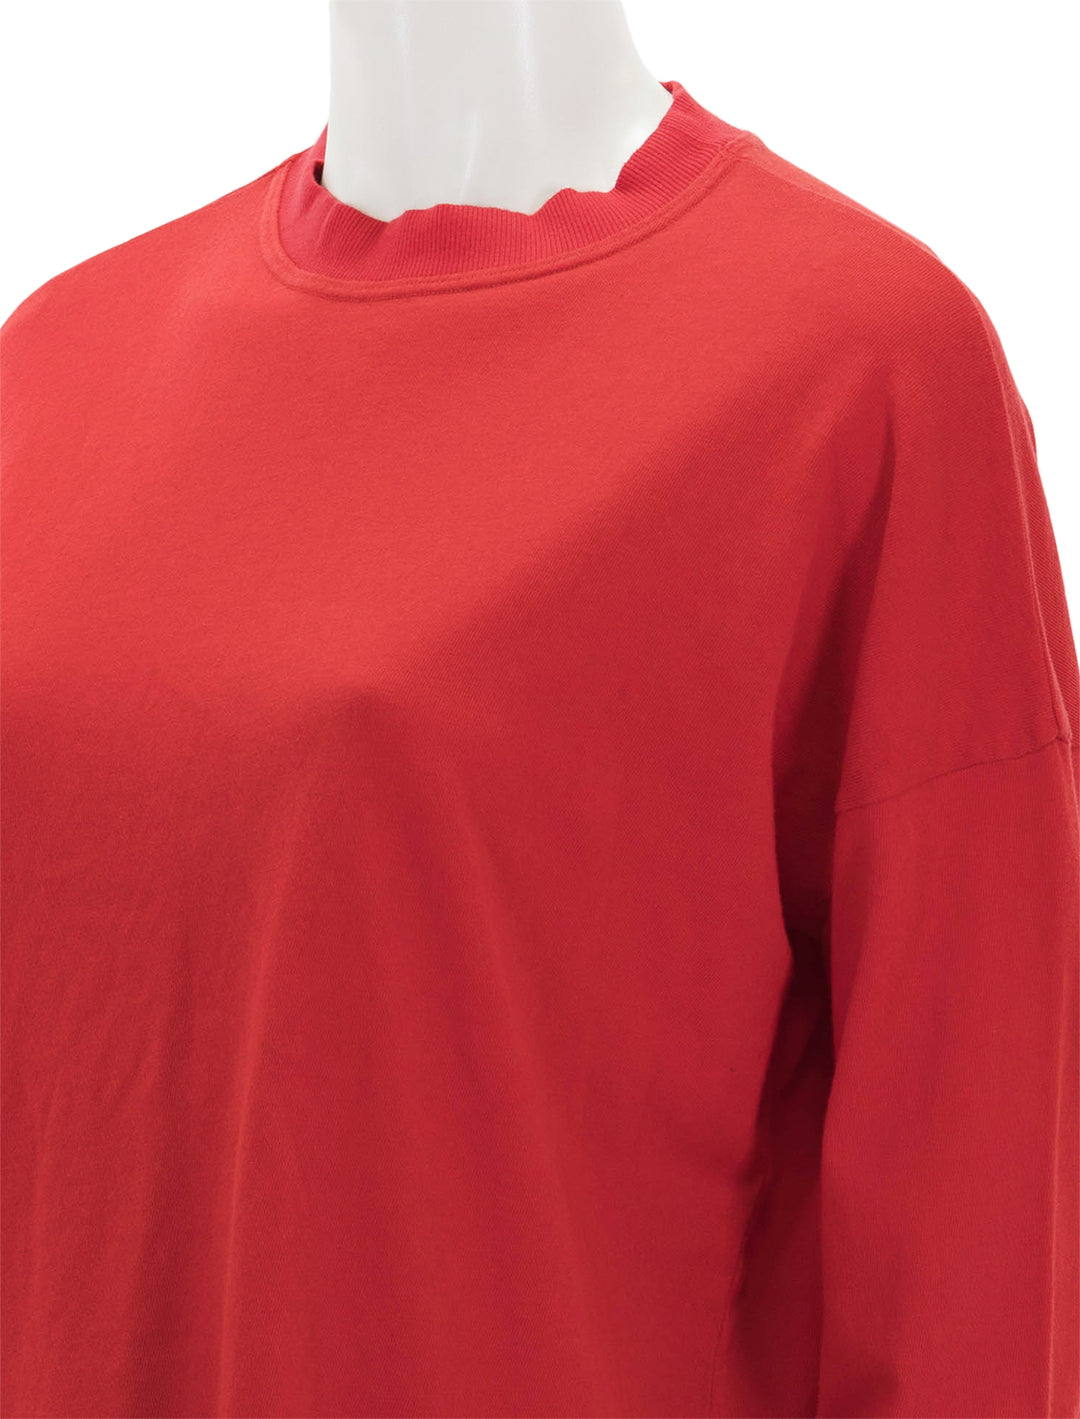 Close-up view of ASKK NY's long sleeve tee in cherry red.